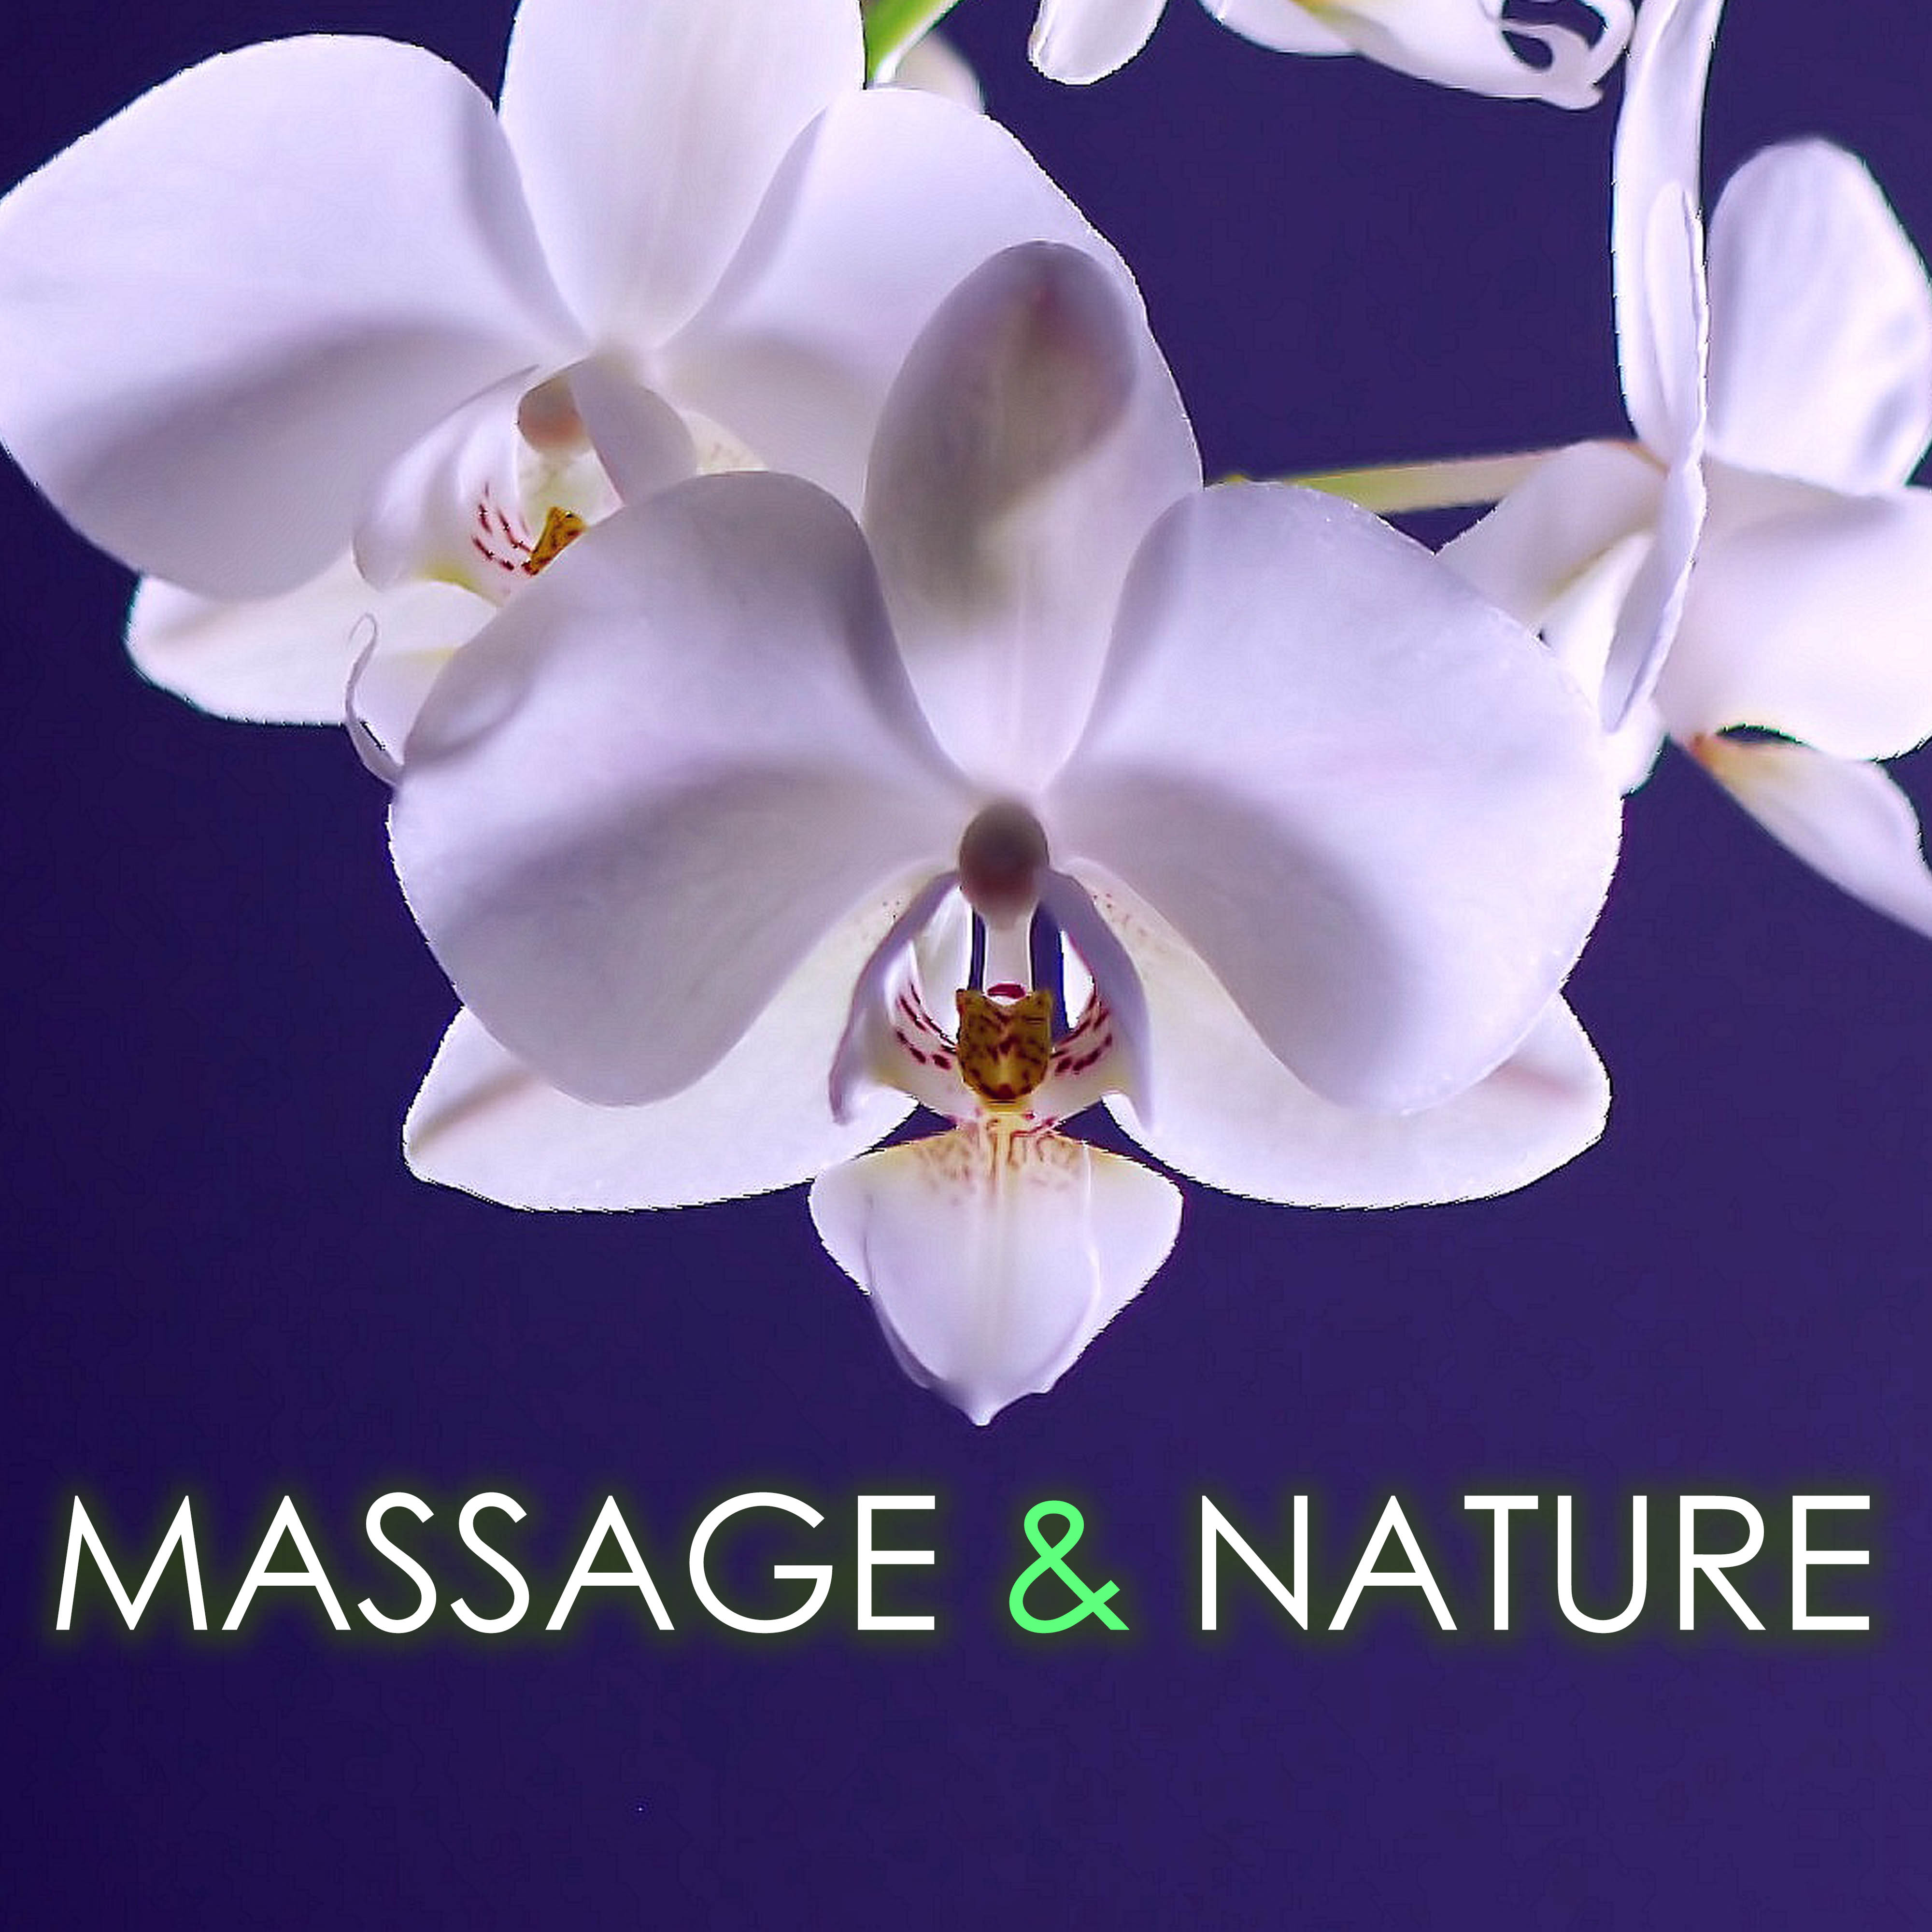 Massage & Nature - Spa Music with Water Sounds